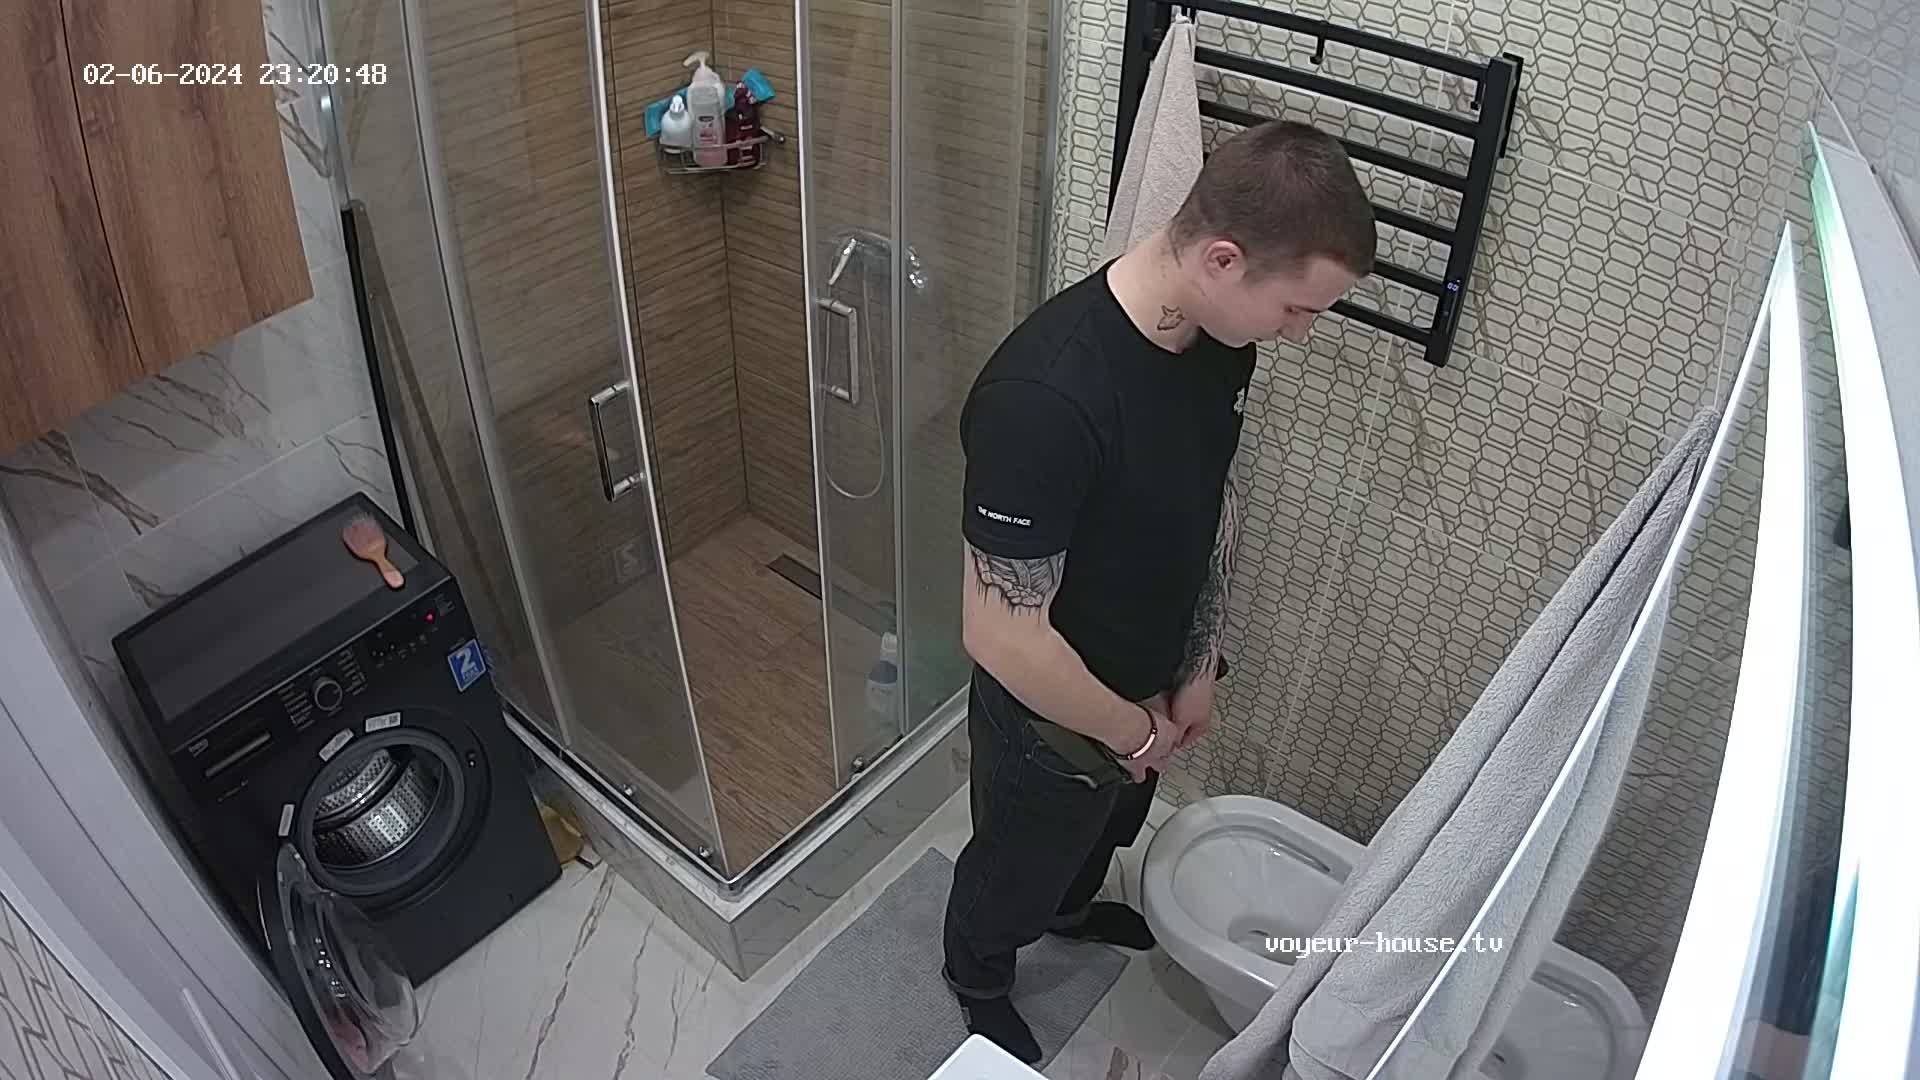 Guest guy pissing 06-02-2024